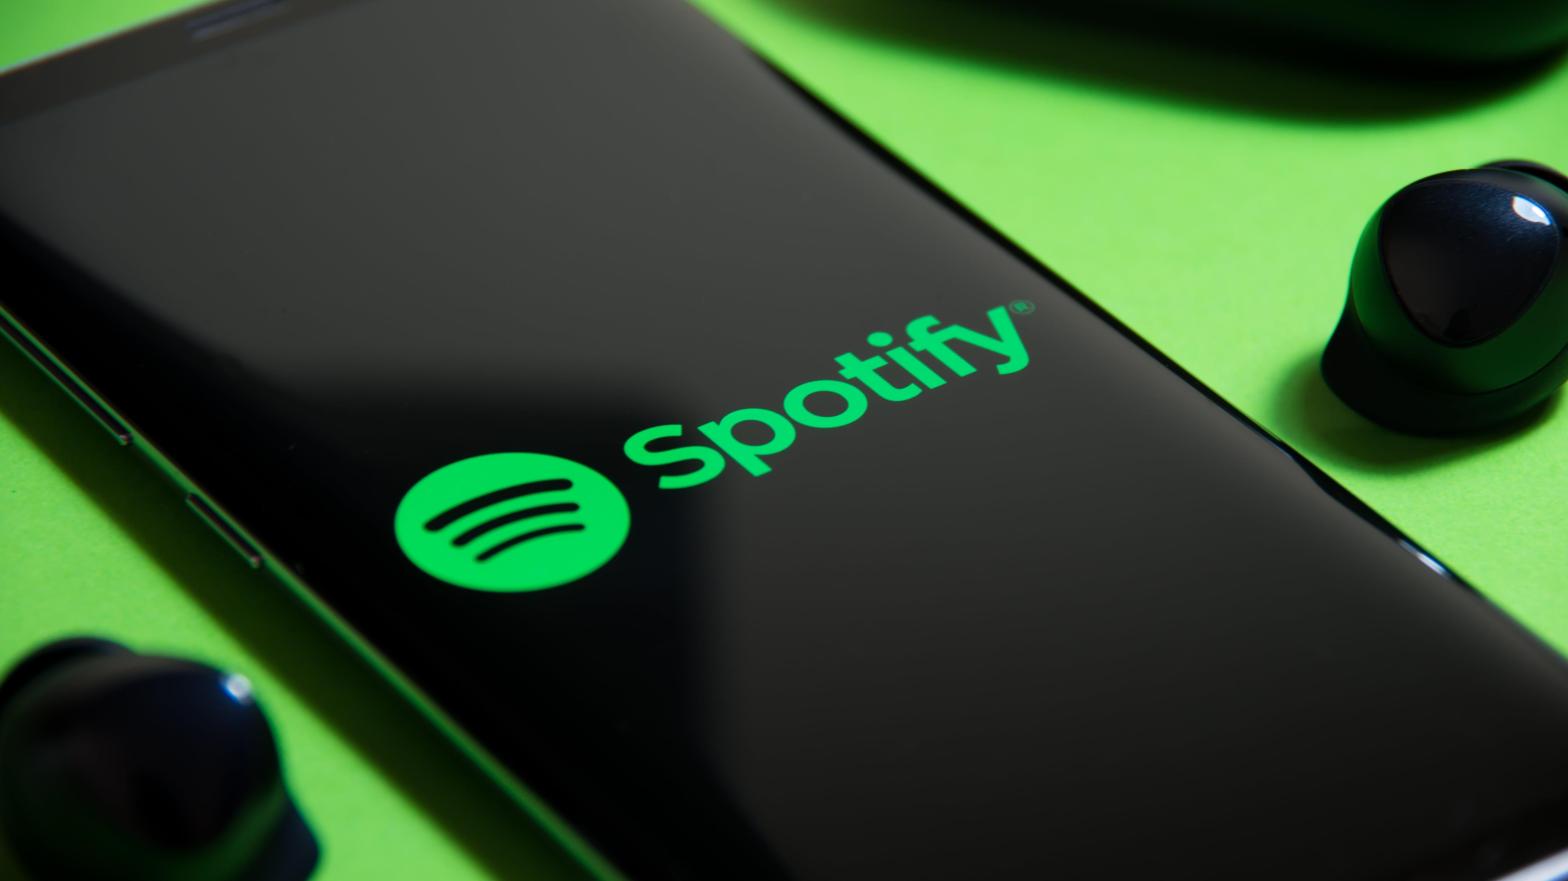 Spotify Wrapped was released today and is best viewed on the Spotify mobile app.  (Image: Chubo - my masterpiece, Shutterstock)